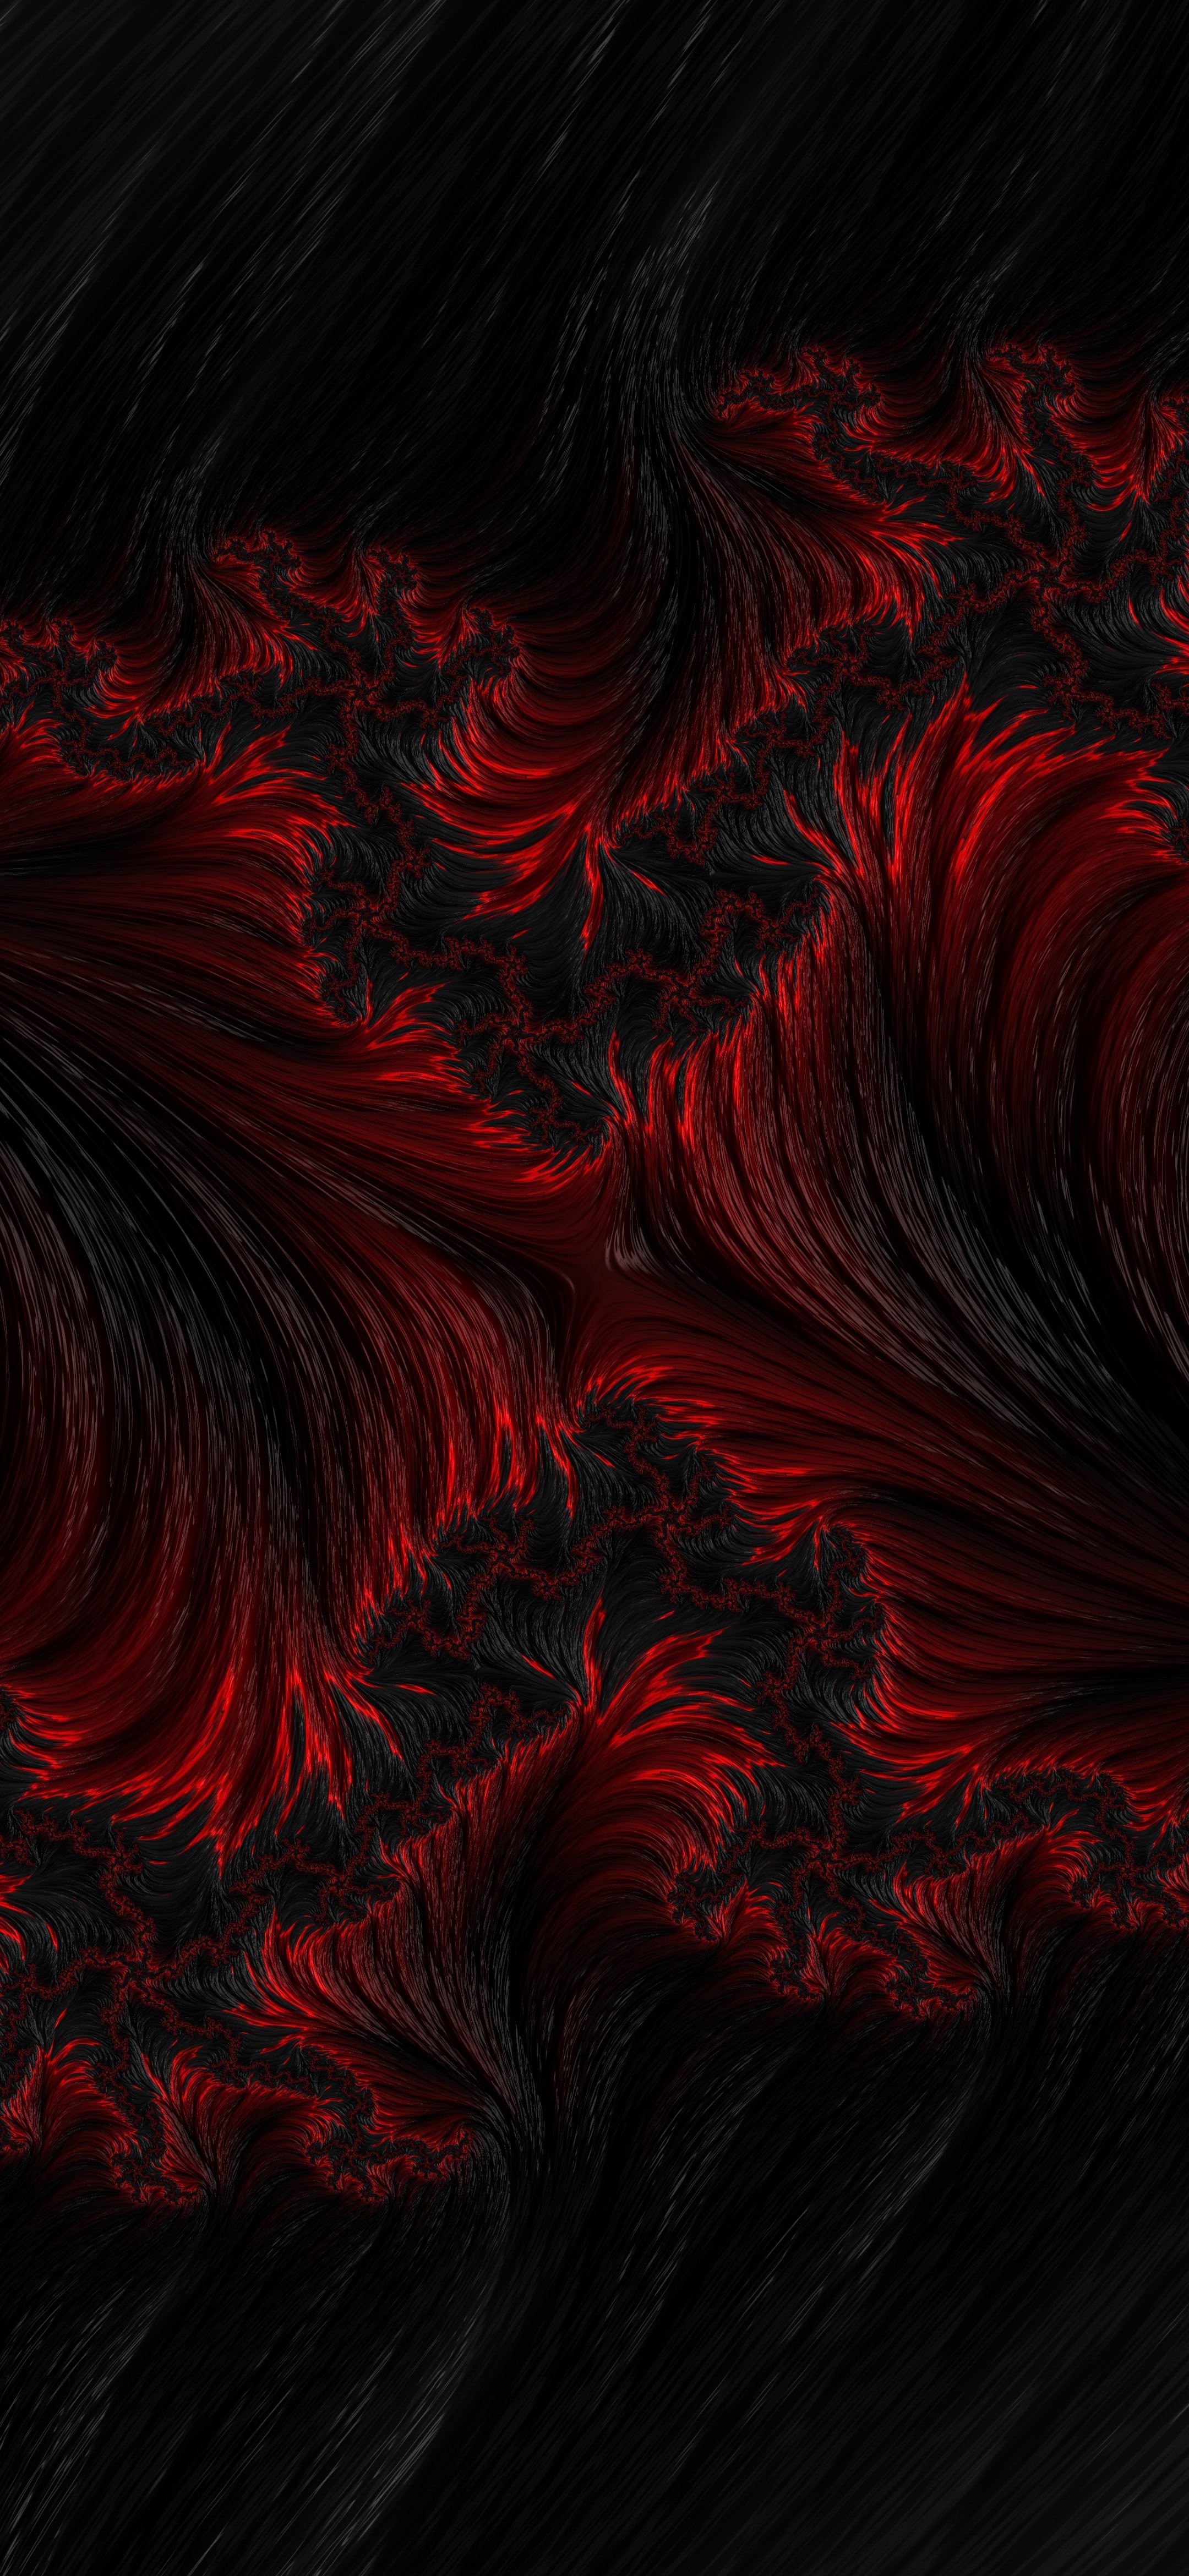 wavy, black, abstract, red, fractal phone wallpaper